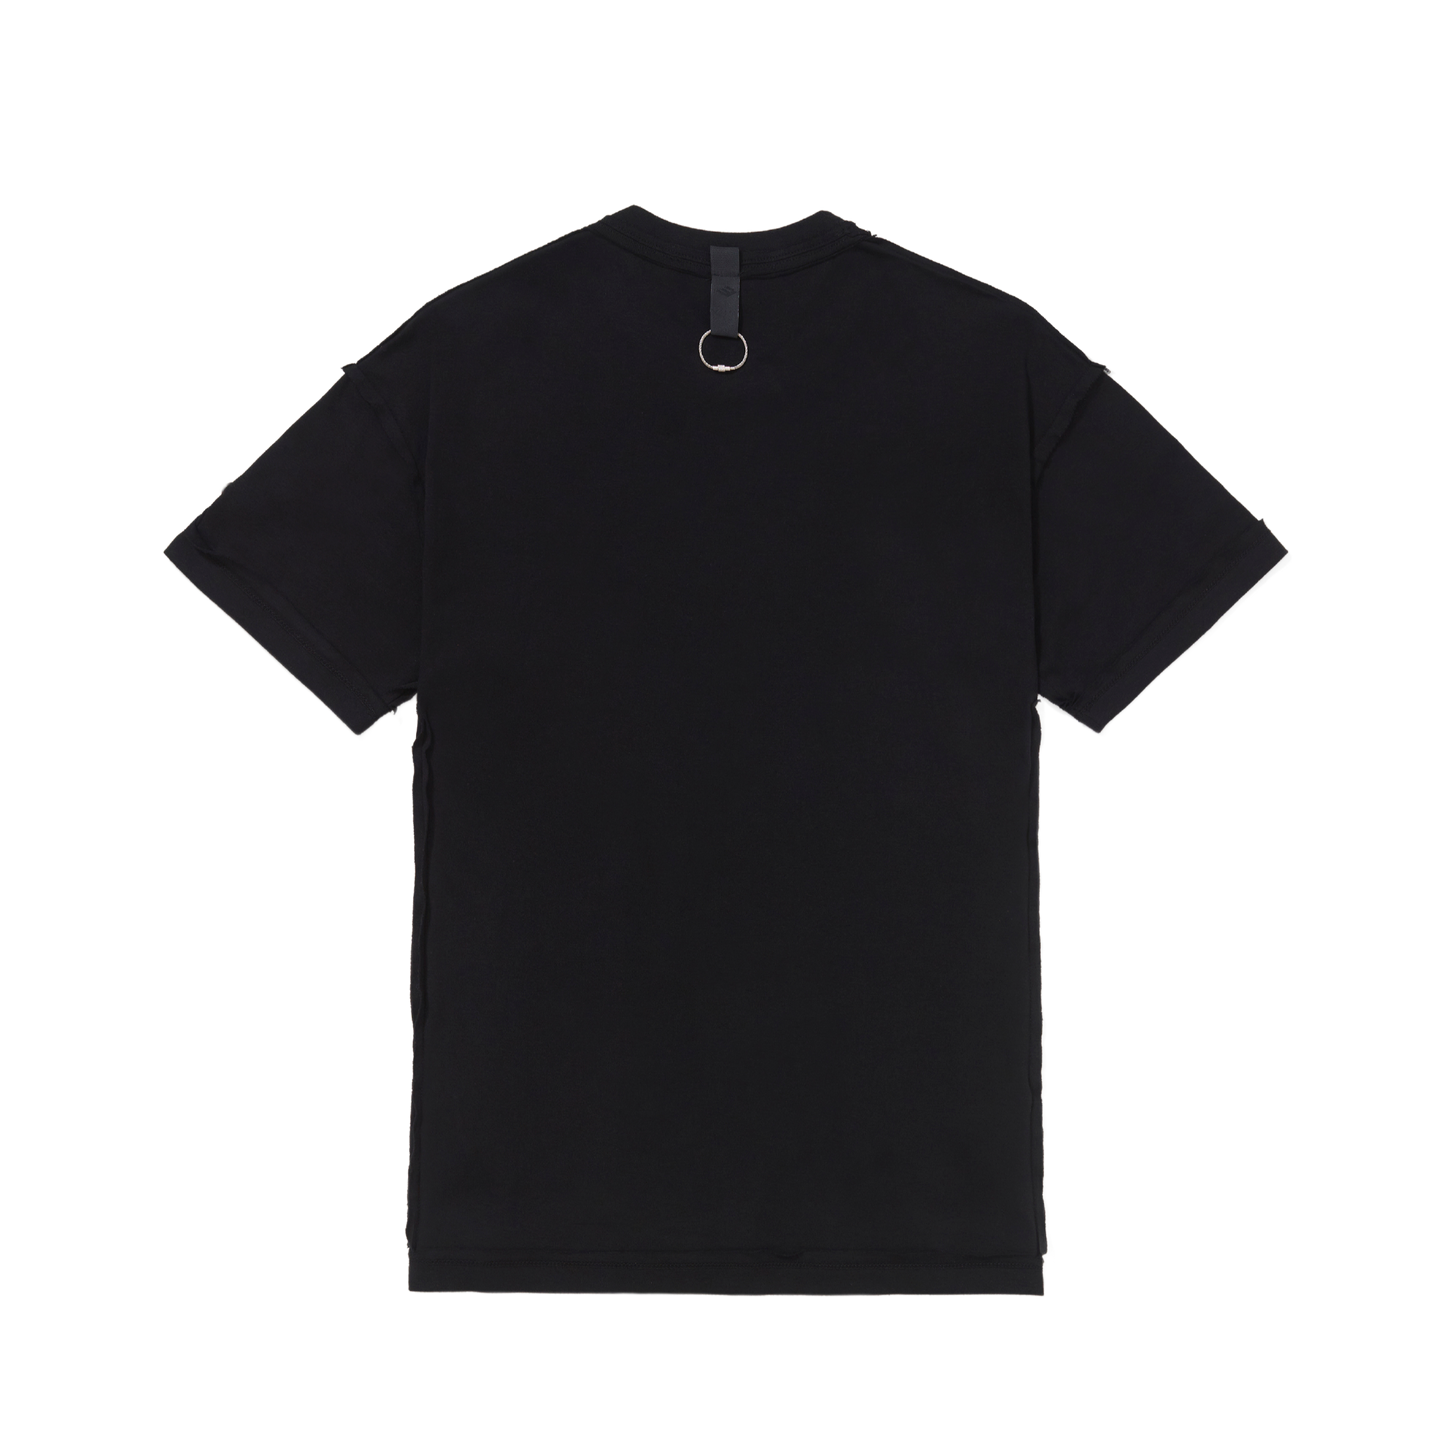 PACE - Pattern Tee "Black" - THE GAME